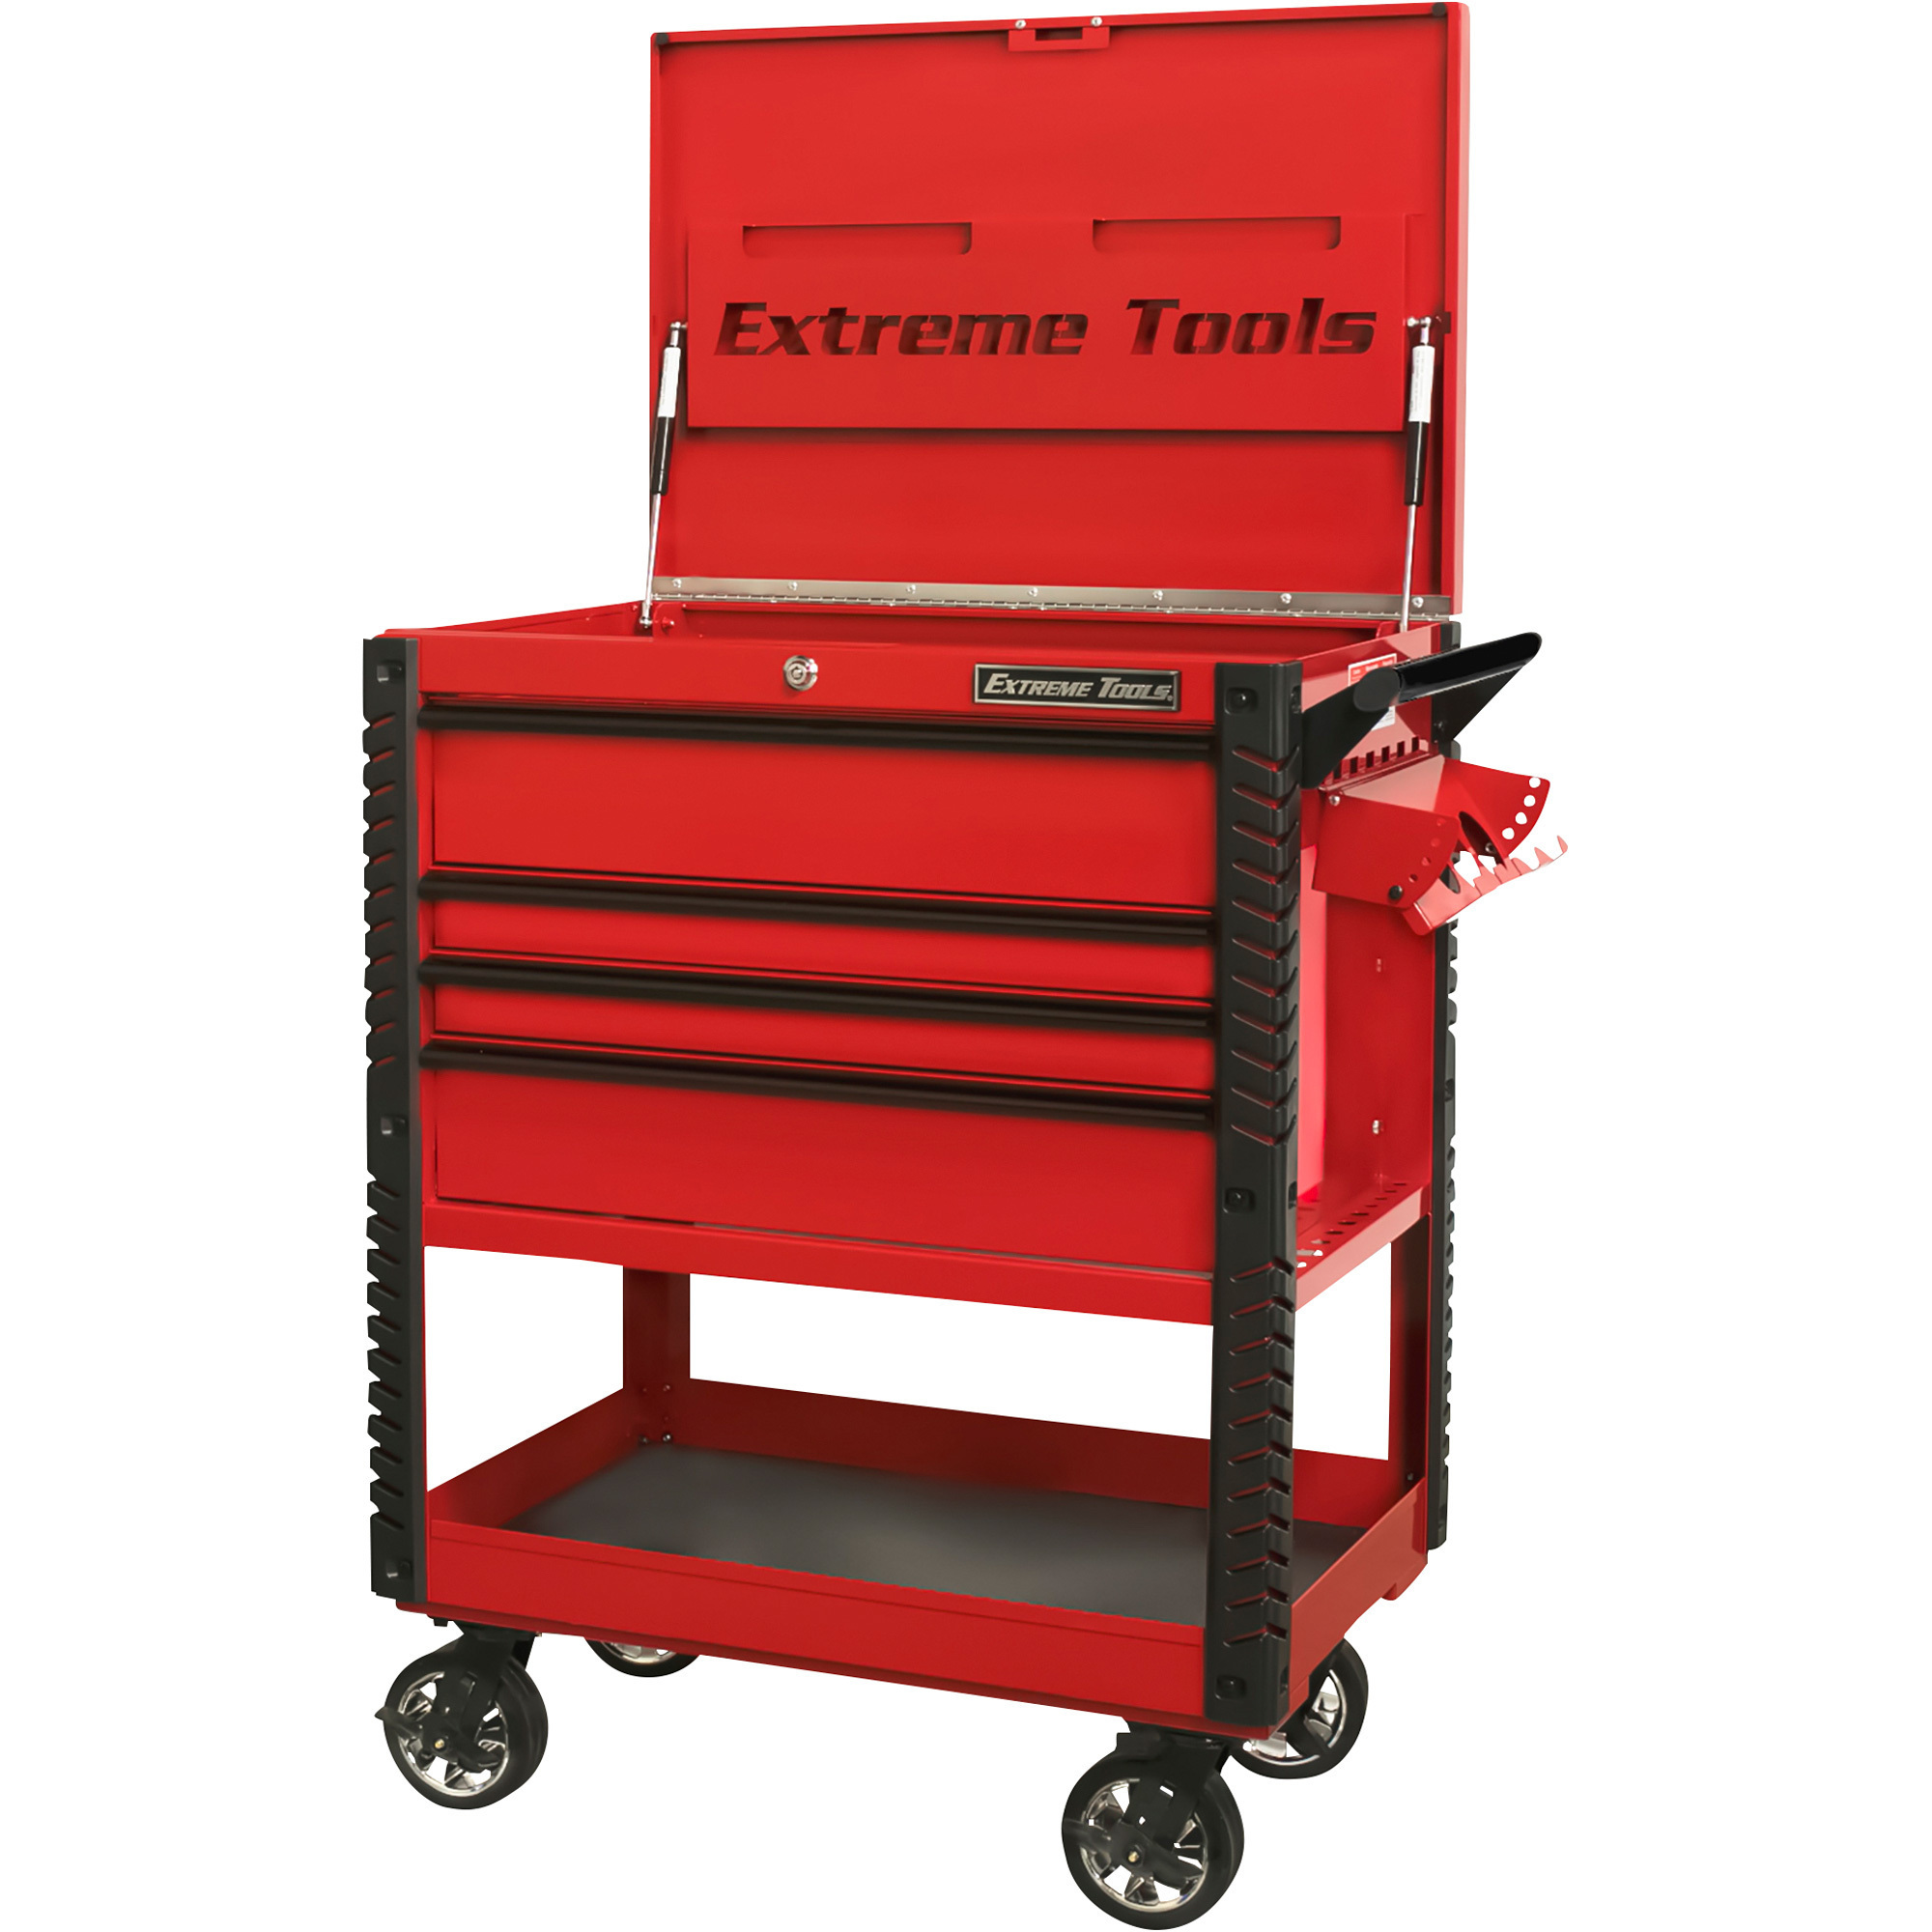 EX Professional Series 33Inch 4 Drawer Deluxe Tool Cart — 33Inch L x 22.875Inch W x 44.25Inch H, Red/Black, Model - Extreme Tools EX3304TCRDBK